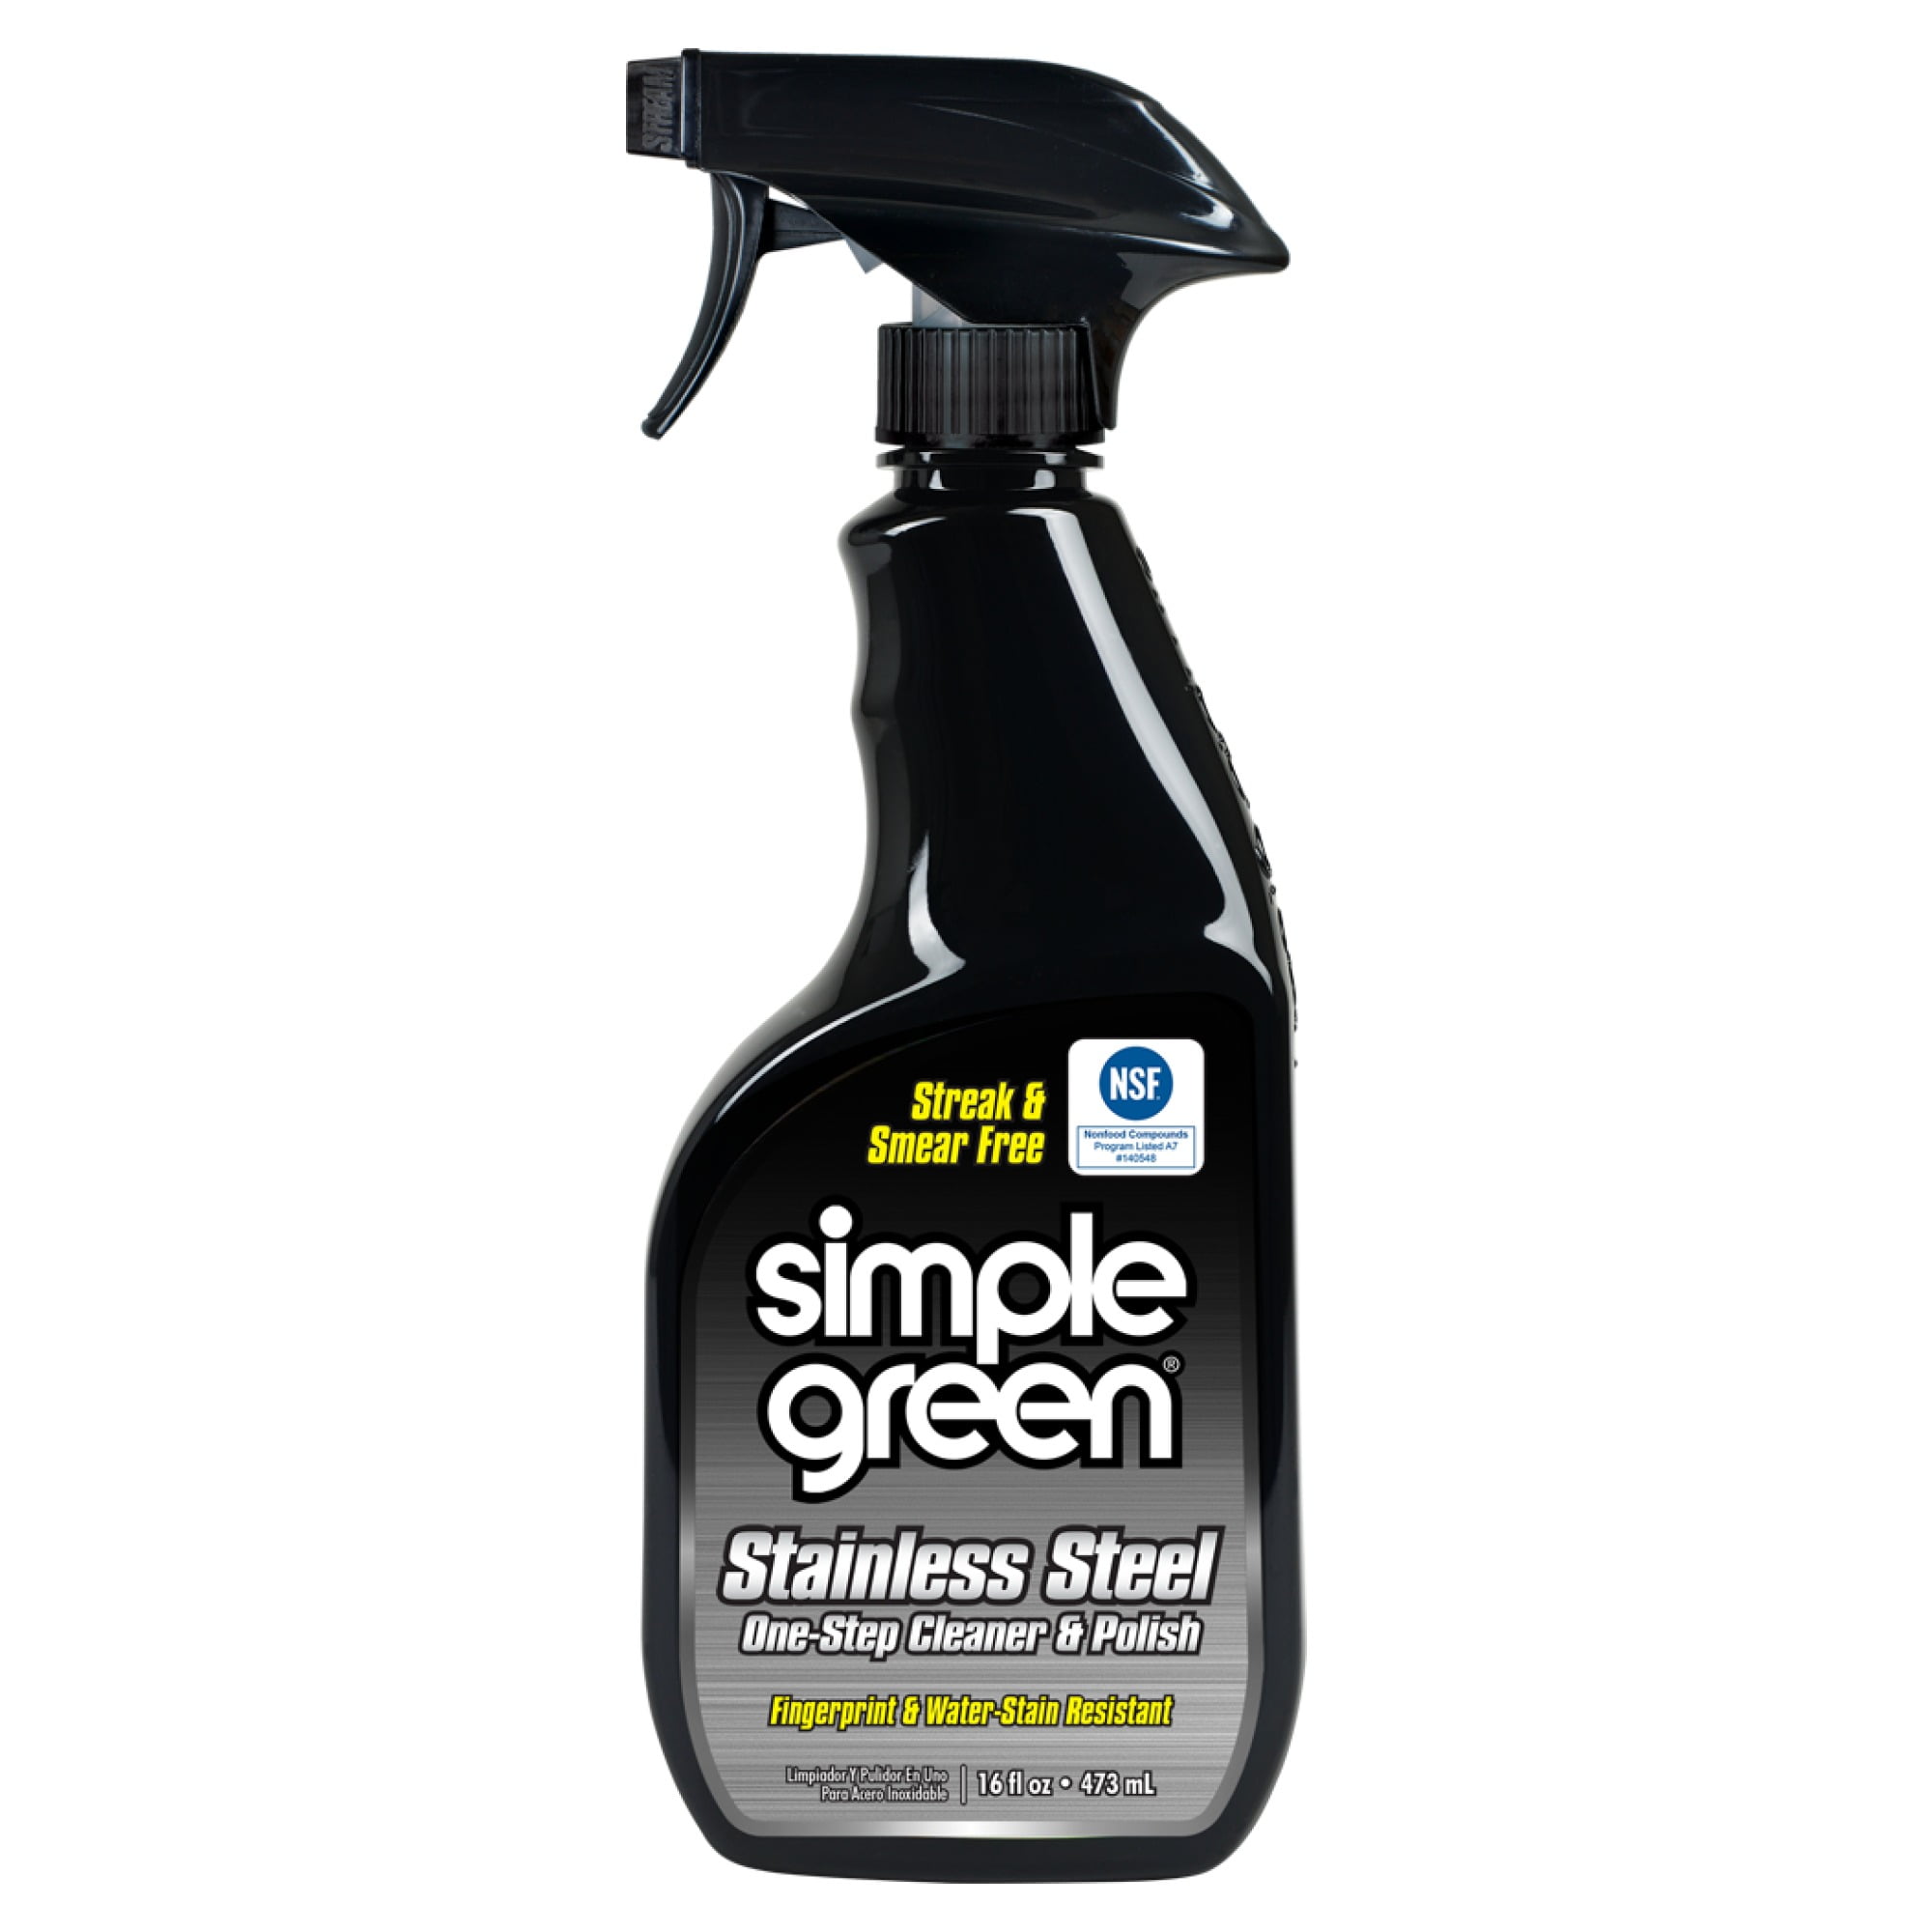 Simple Green Stainless Steel One-Step Cleaner And Polish, 16 Oz Stainless Steel Cleaner At Walmart